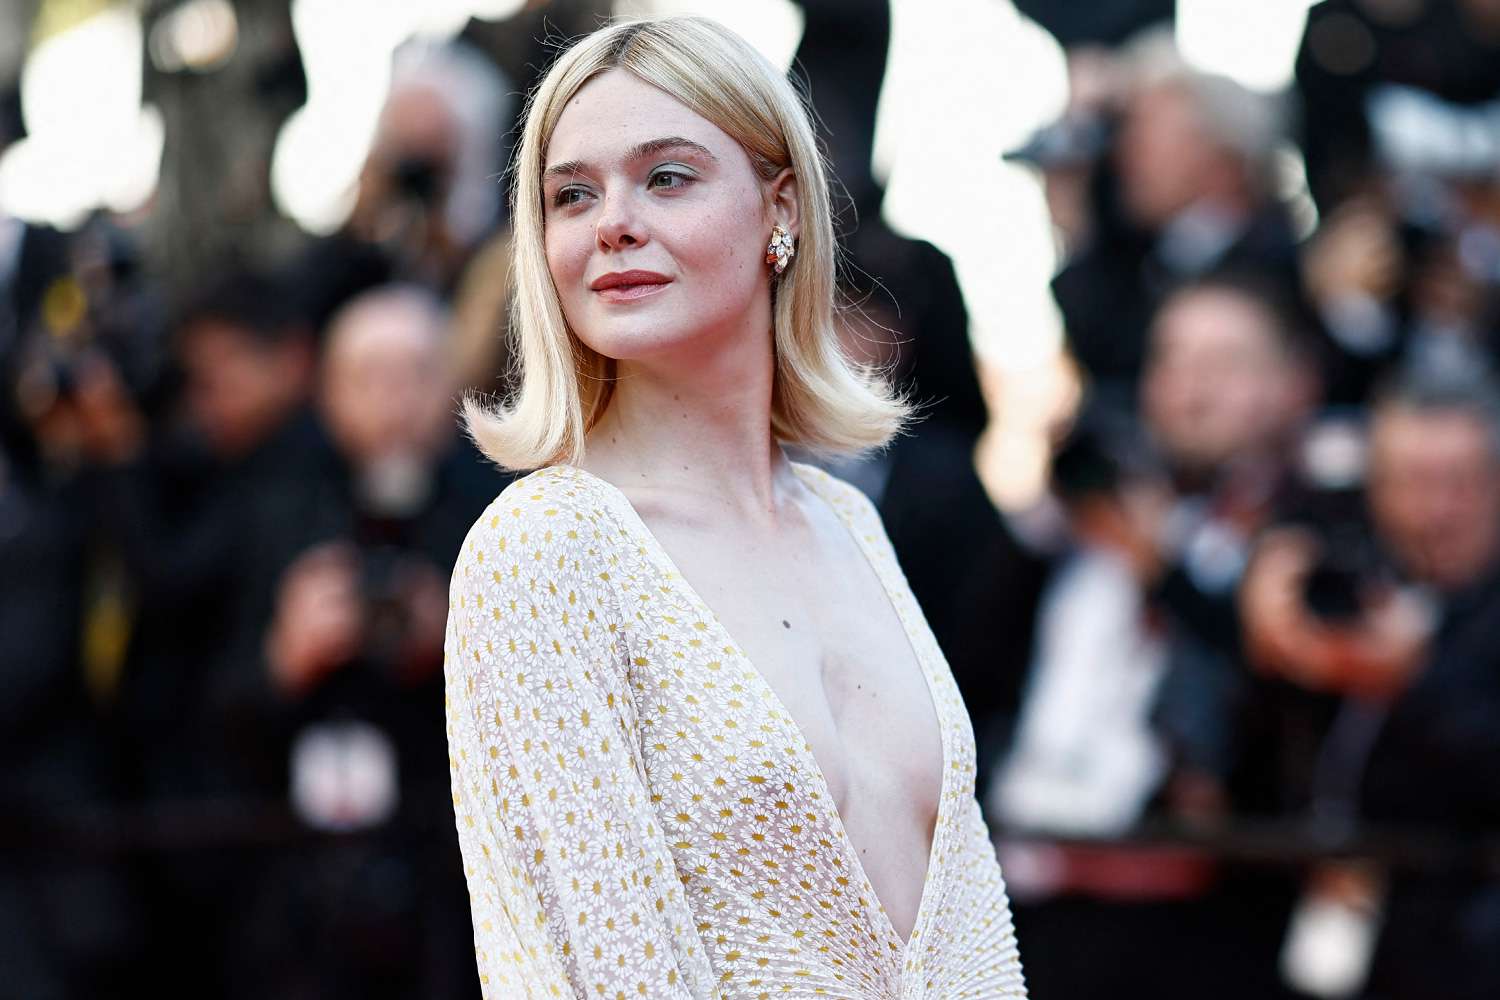 Elle Fanning Stuns in Sheer Gucci Gown at Cannes, Plus Serena Williams, Stevie Nicks and More